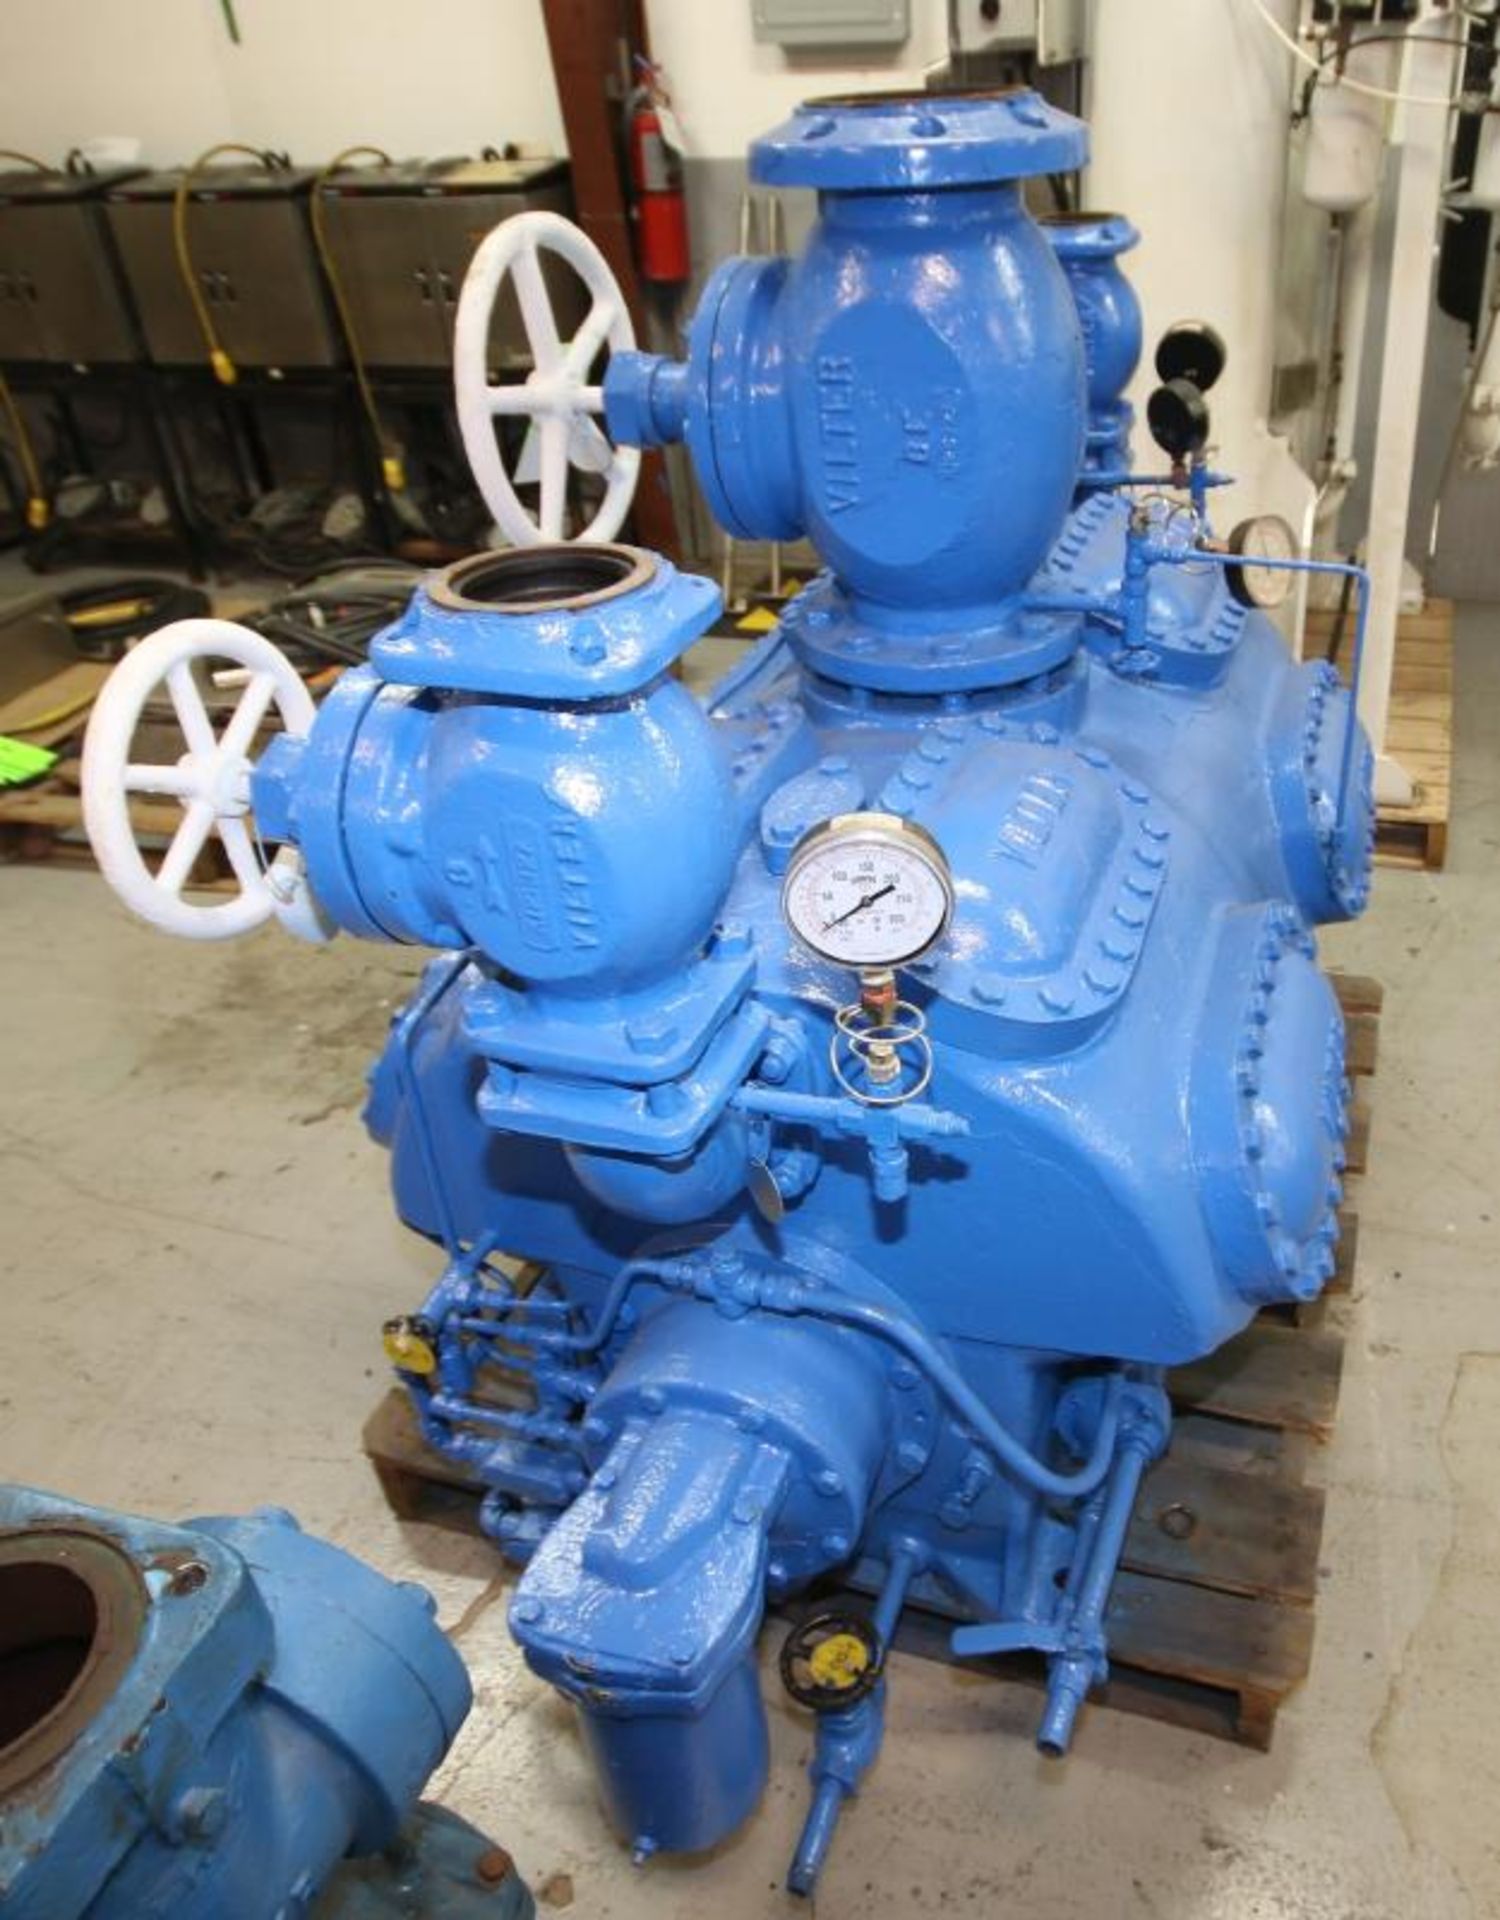 Vilter 16 - Cylinder Reciprocating Ammonia Compressor Head, Size A11B4416B, SN 21056, Order No. D- - Image 2 of 5